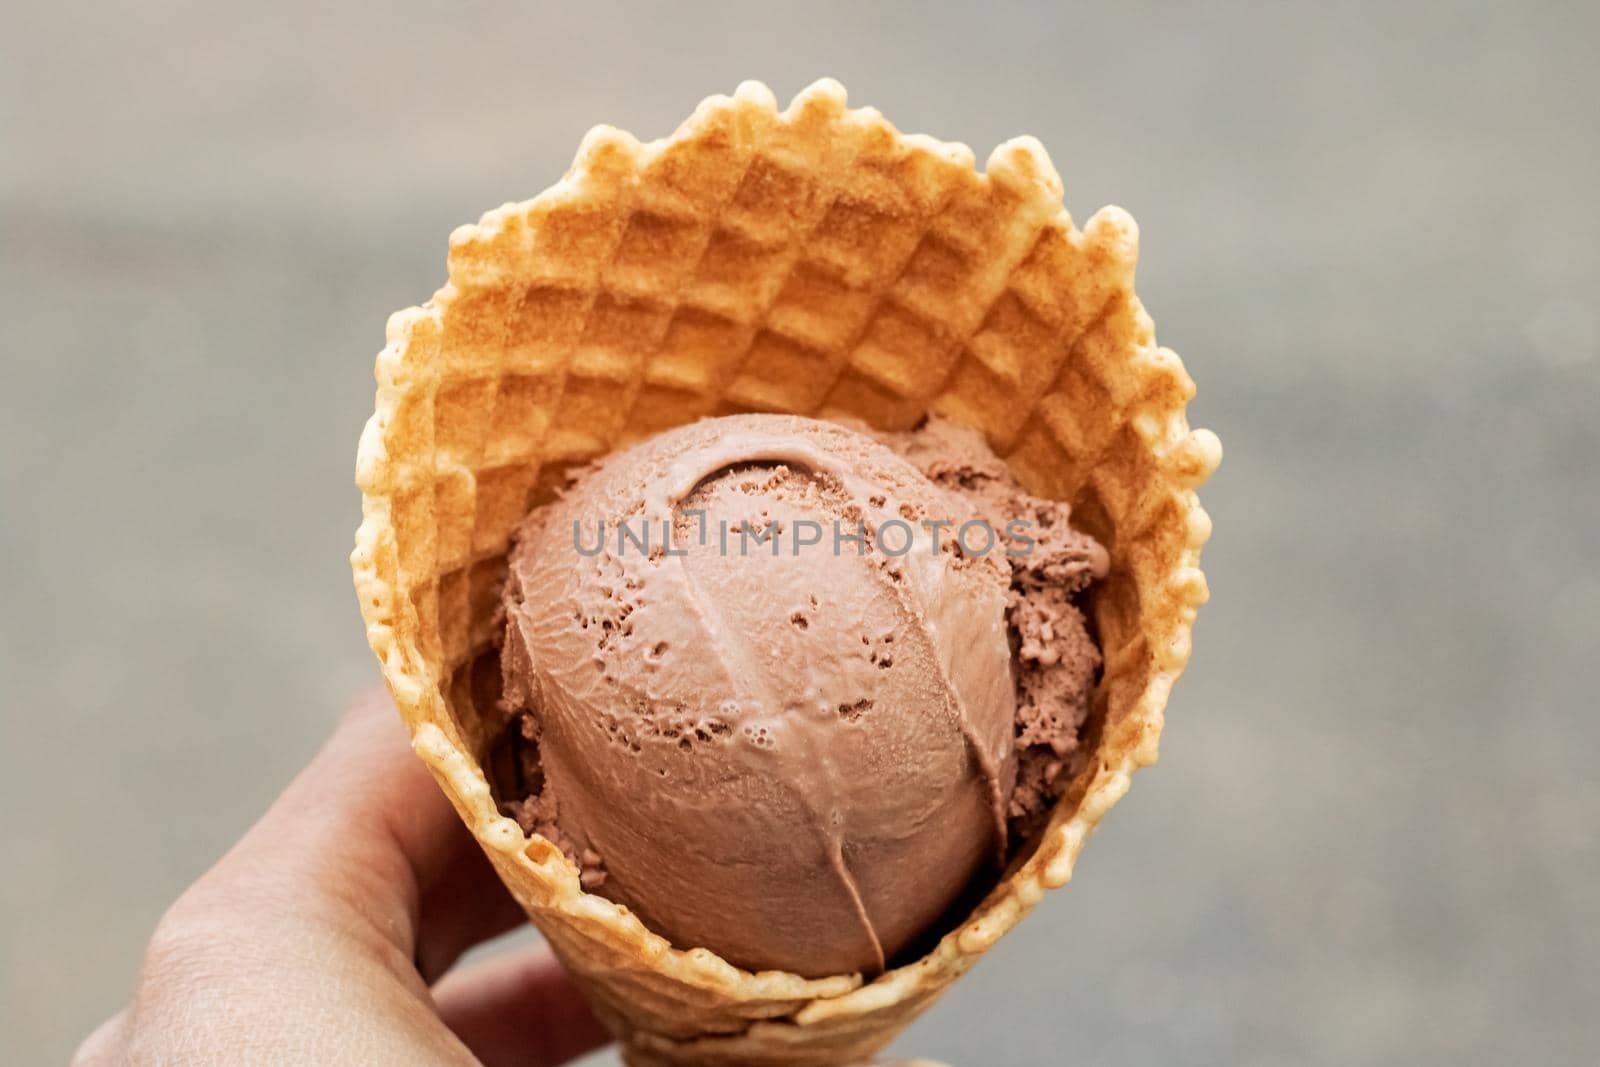 Chocolate ice cream in a waffle cone on gray background